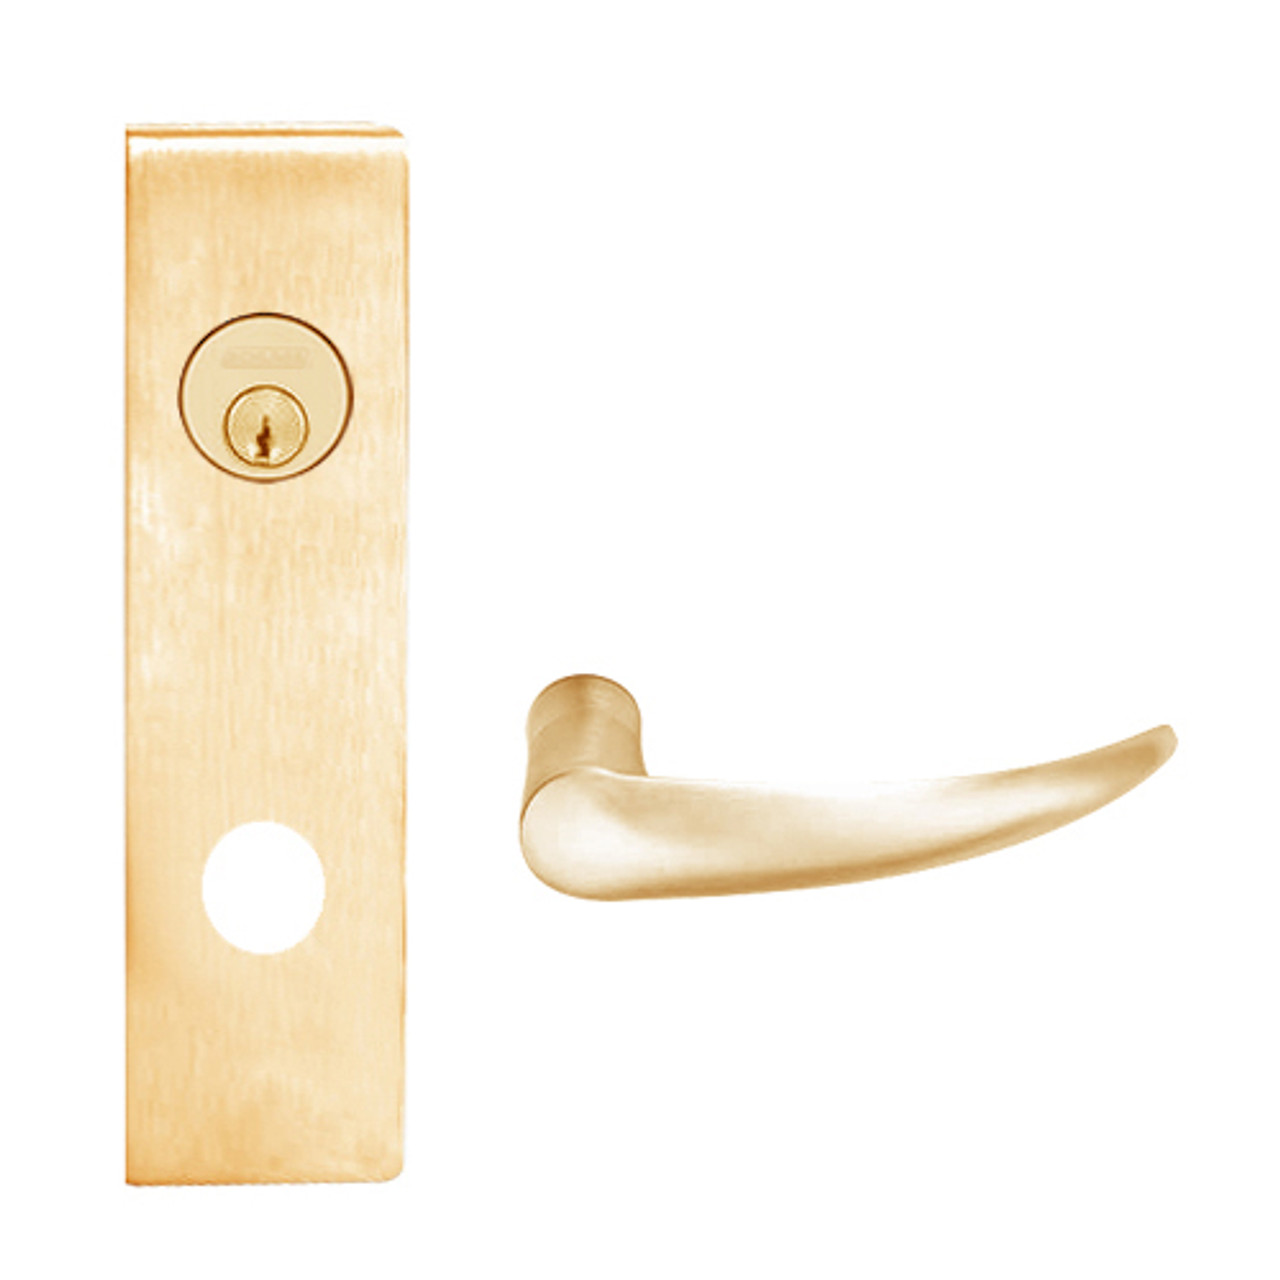 L9453L-OME-N-612 Schlage L Series Less Cylinder Entrance with Deadbolt Commercial Mortise Lock with Omega Lever Design in Satin Bronze